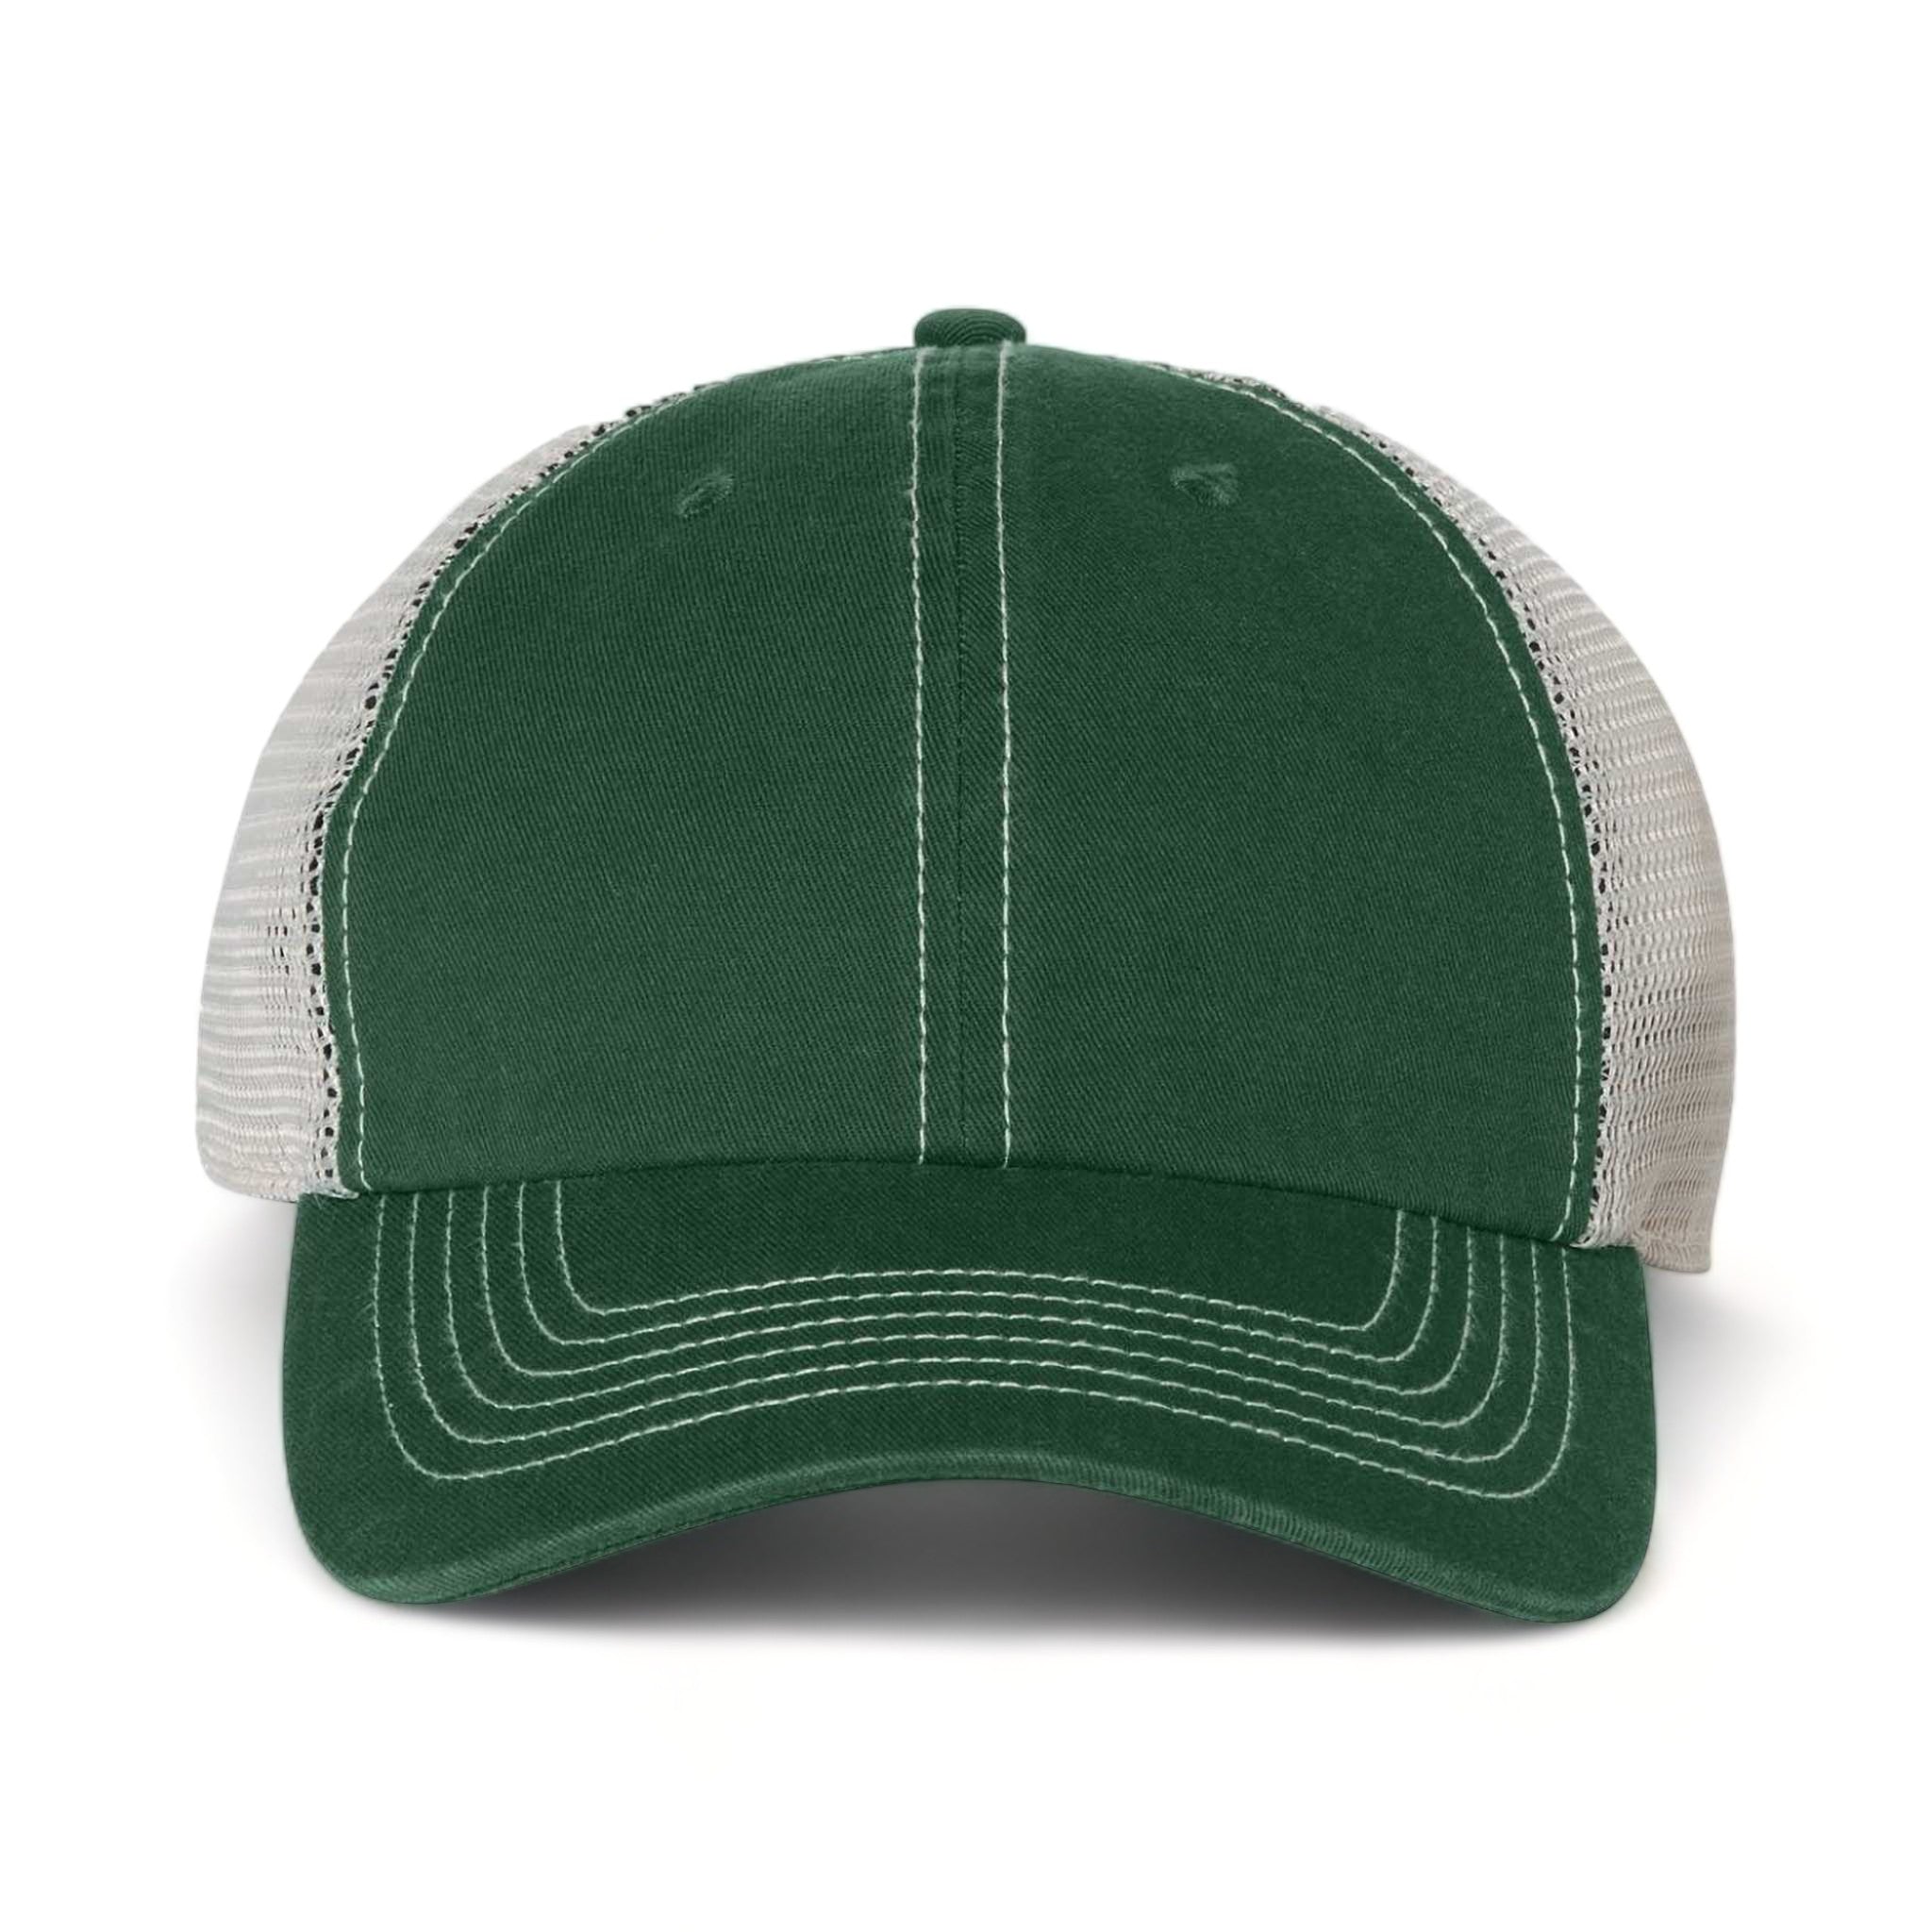 Front view of 47 Brand 4710 custom hat in dark green and stone